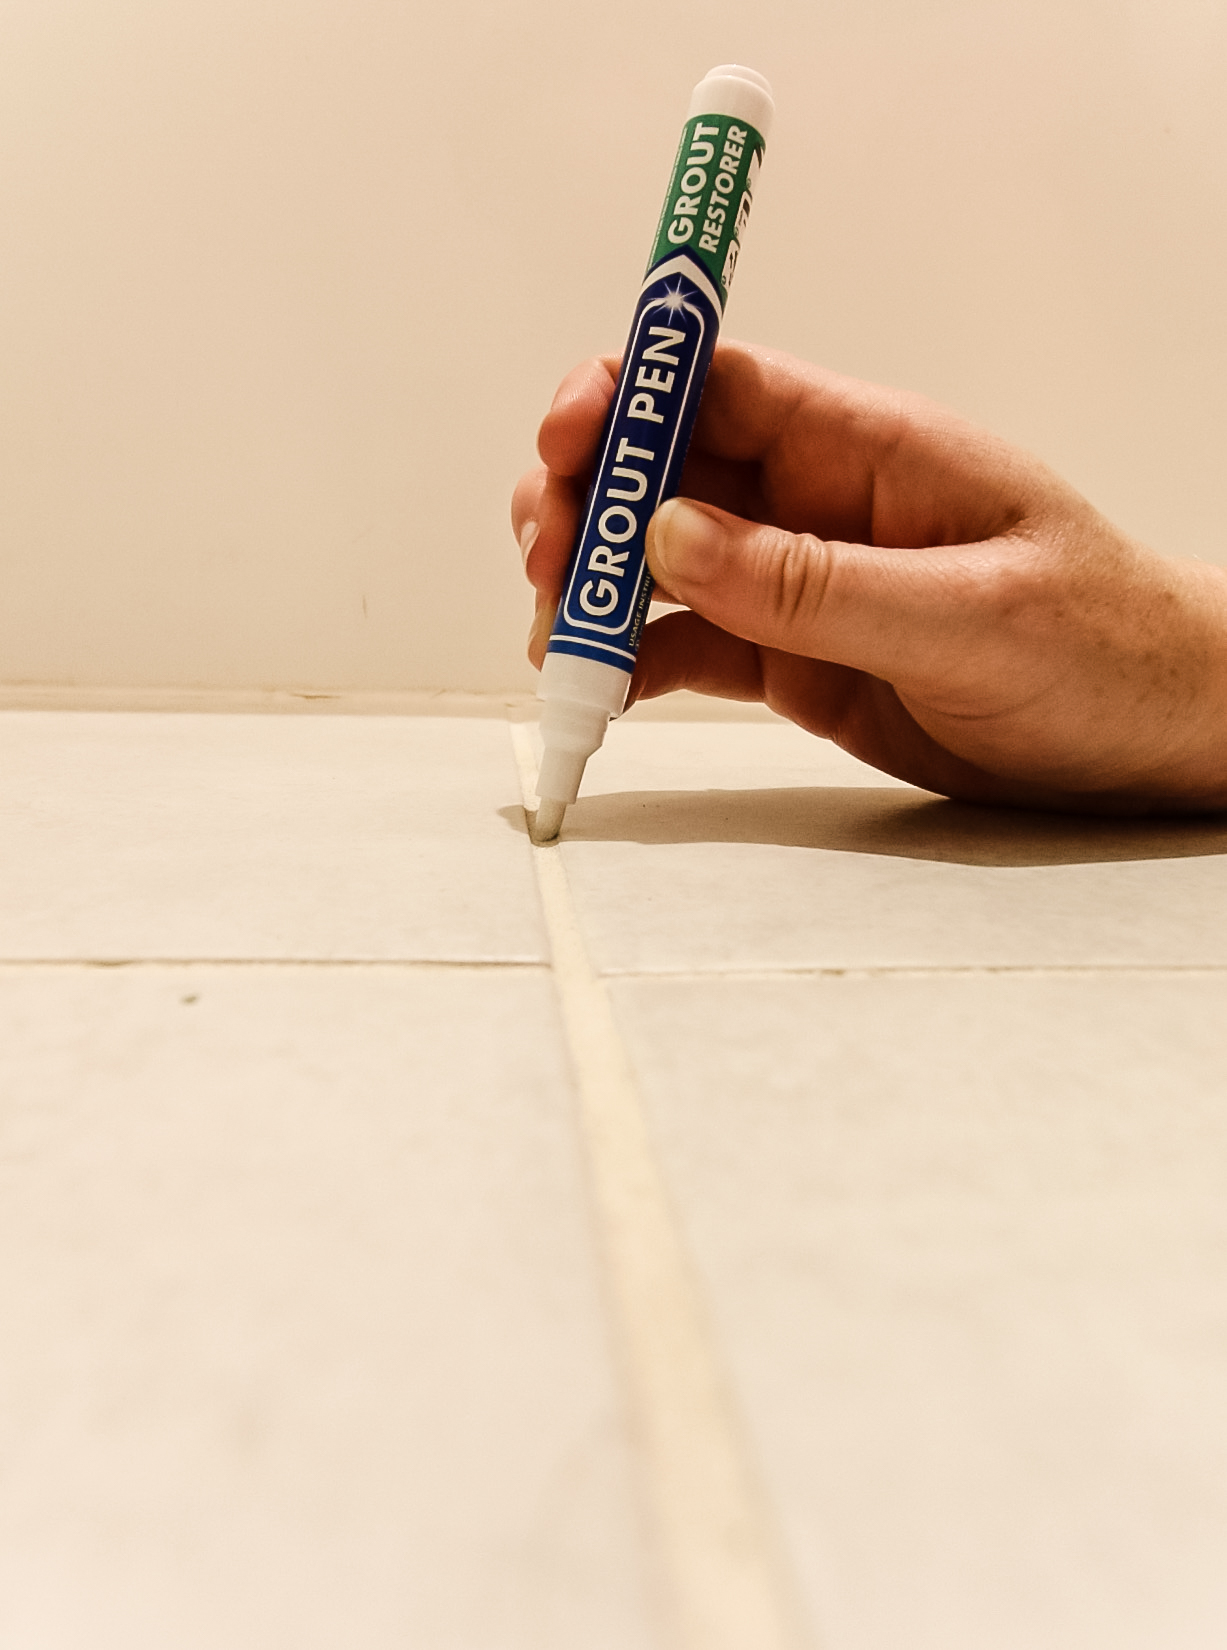 WHITE FURNITURE TOUCH UP PEN Marker Permanent Removes Marks Cabinet Floor UK